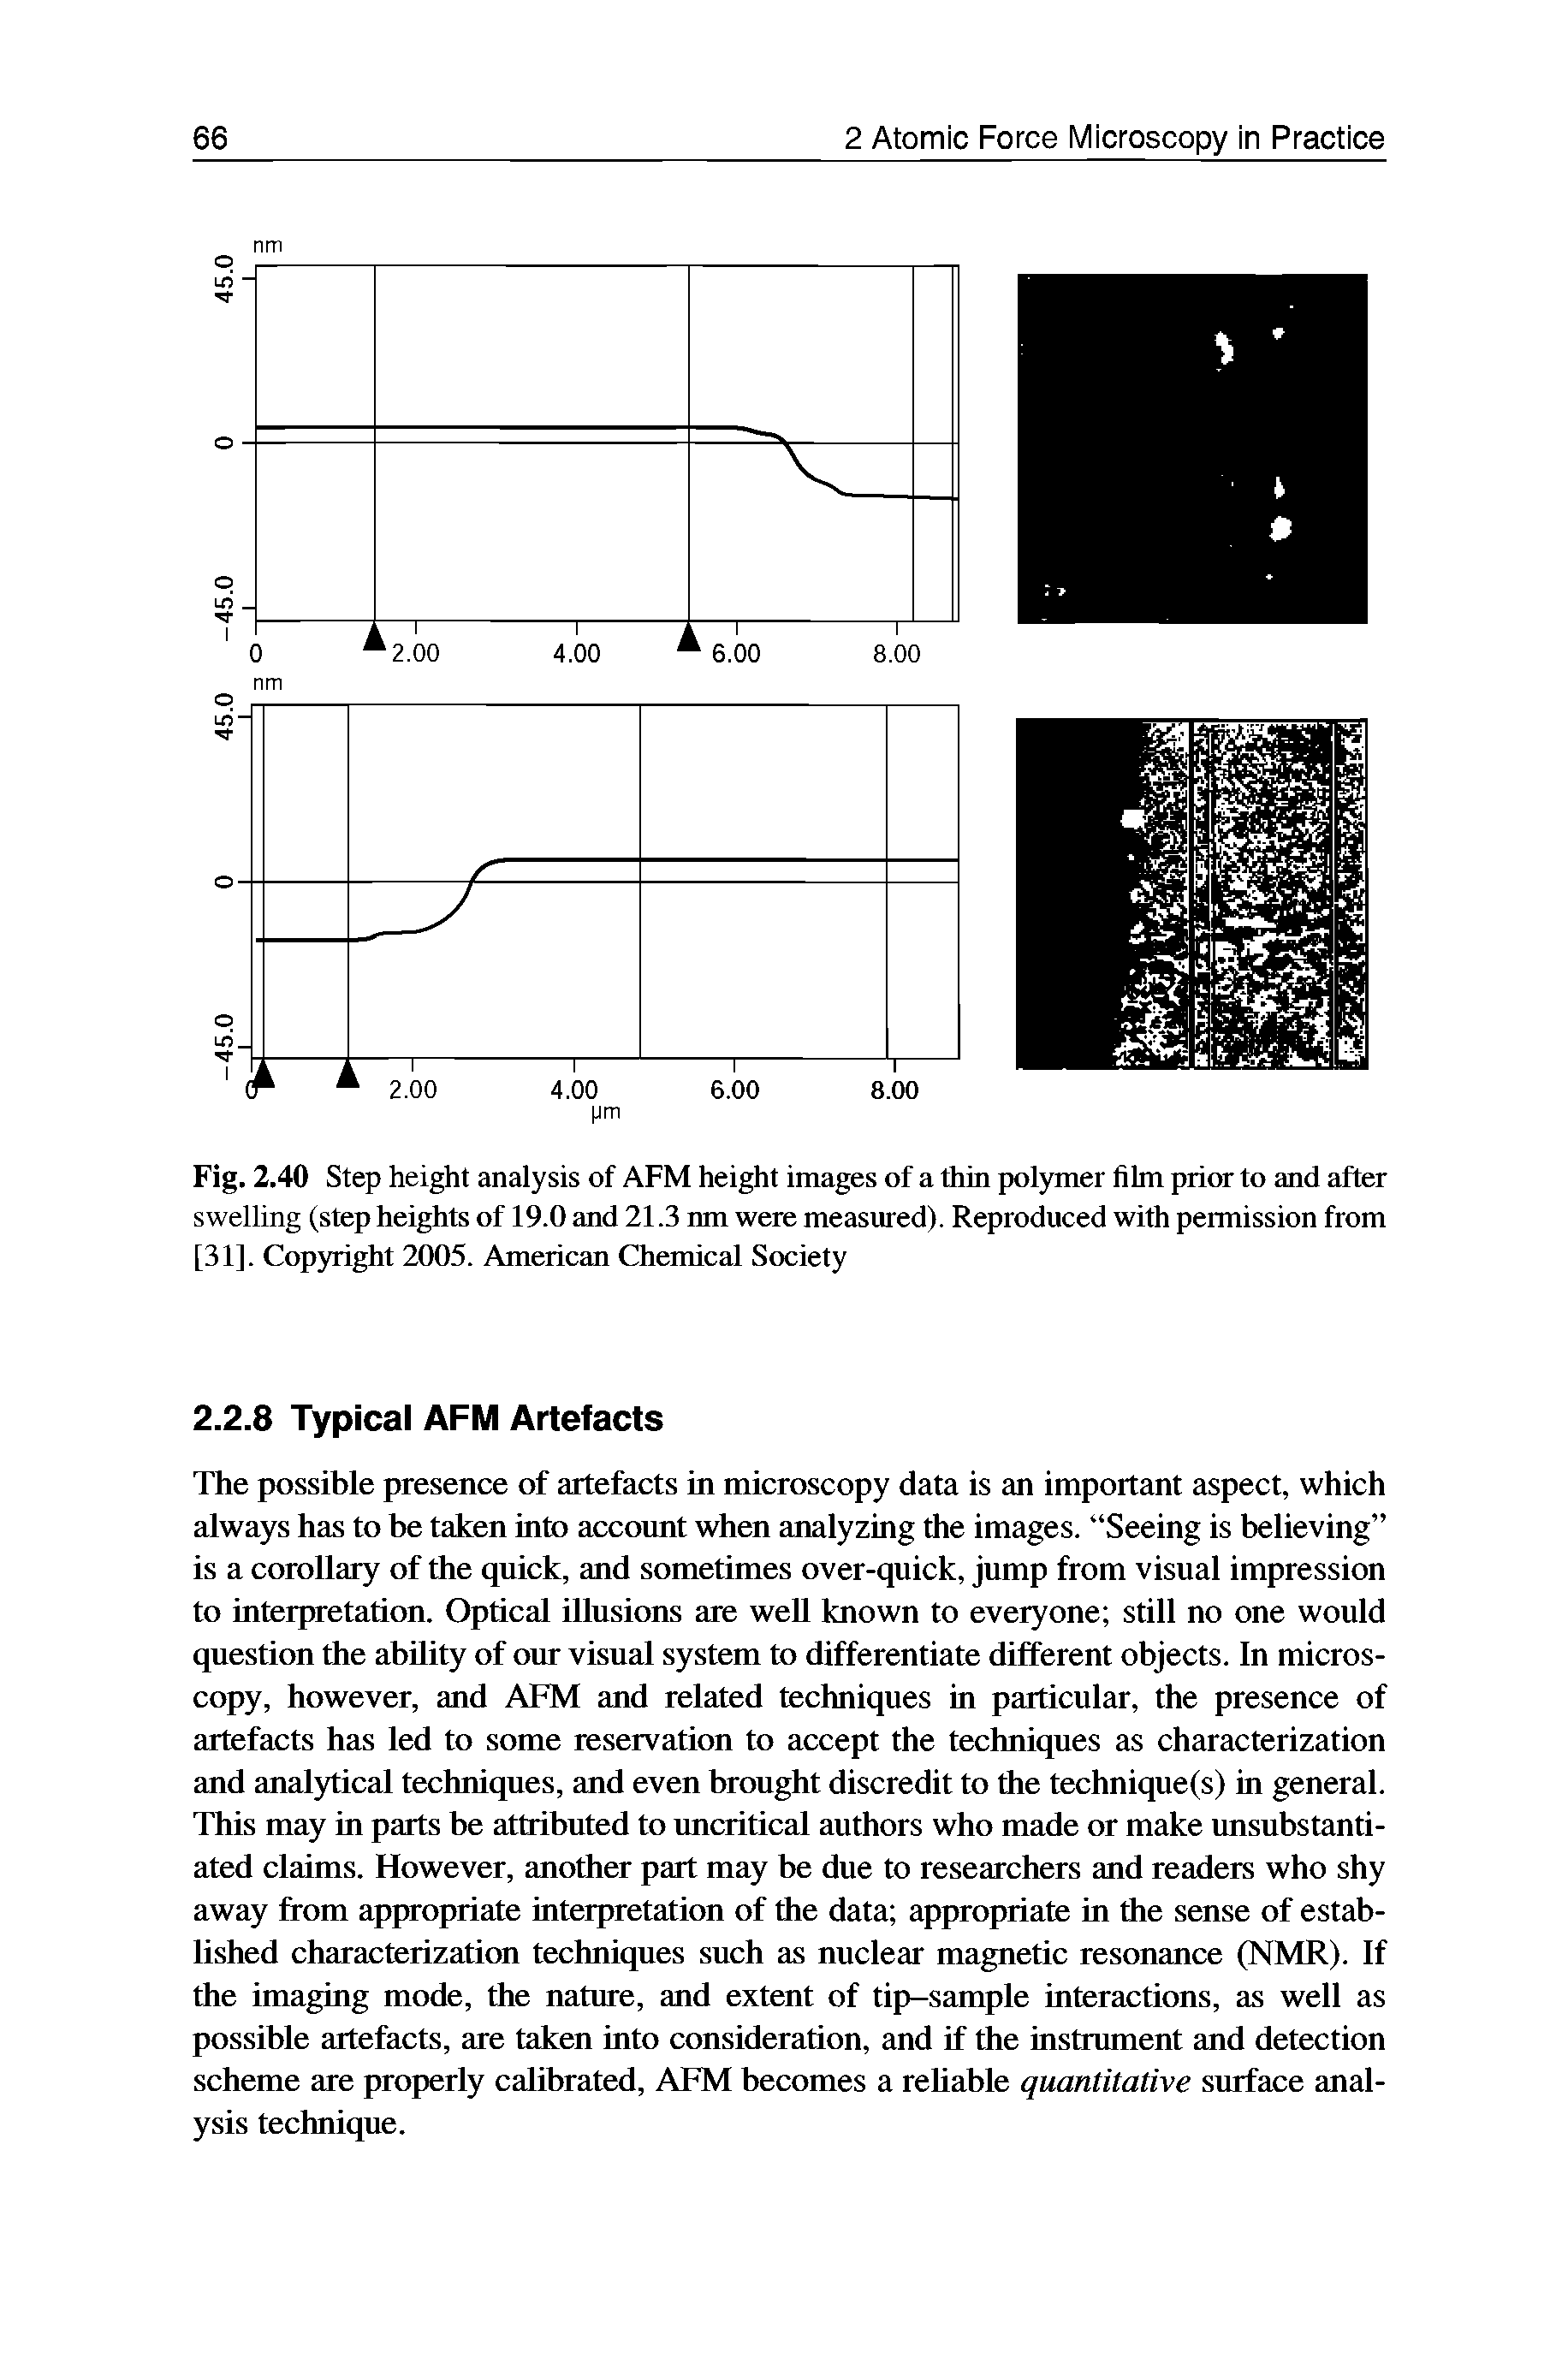 Fig. 2.40 Step height analysis of AFM height images of a thin polymer film prior to and after swelling (step heights of 19.0 and 21.3 nm were measured). Reproduced with permission from [31]. Copyright 2005. American Chemical Society...